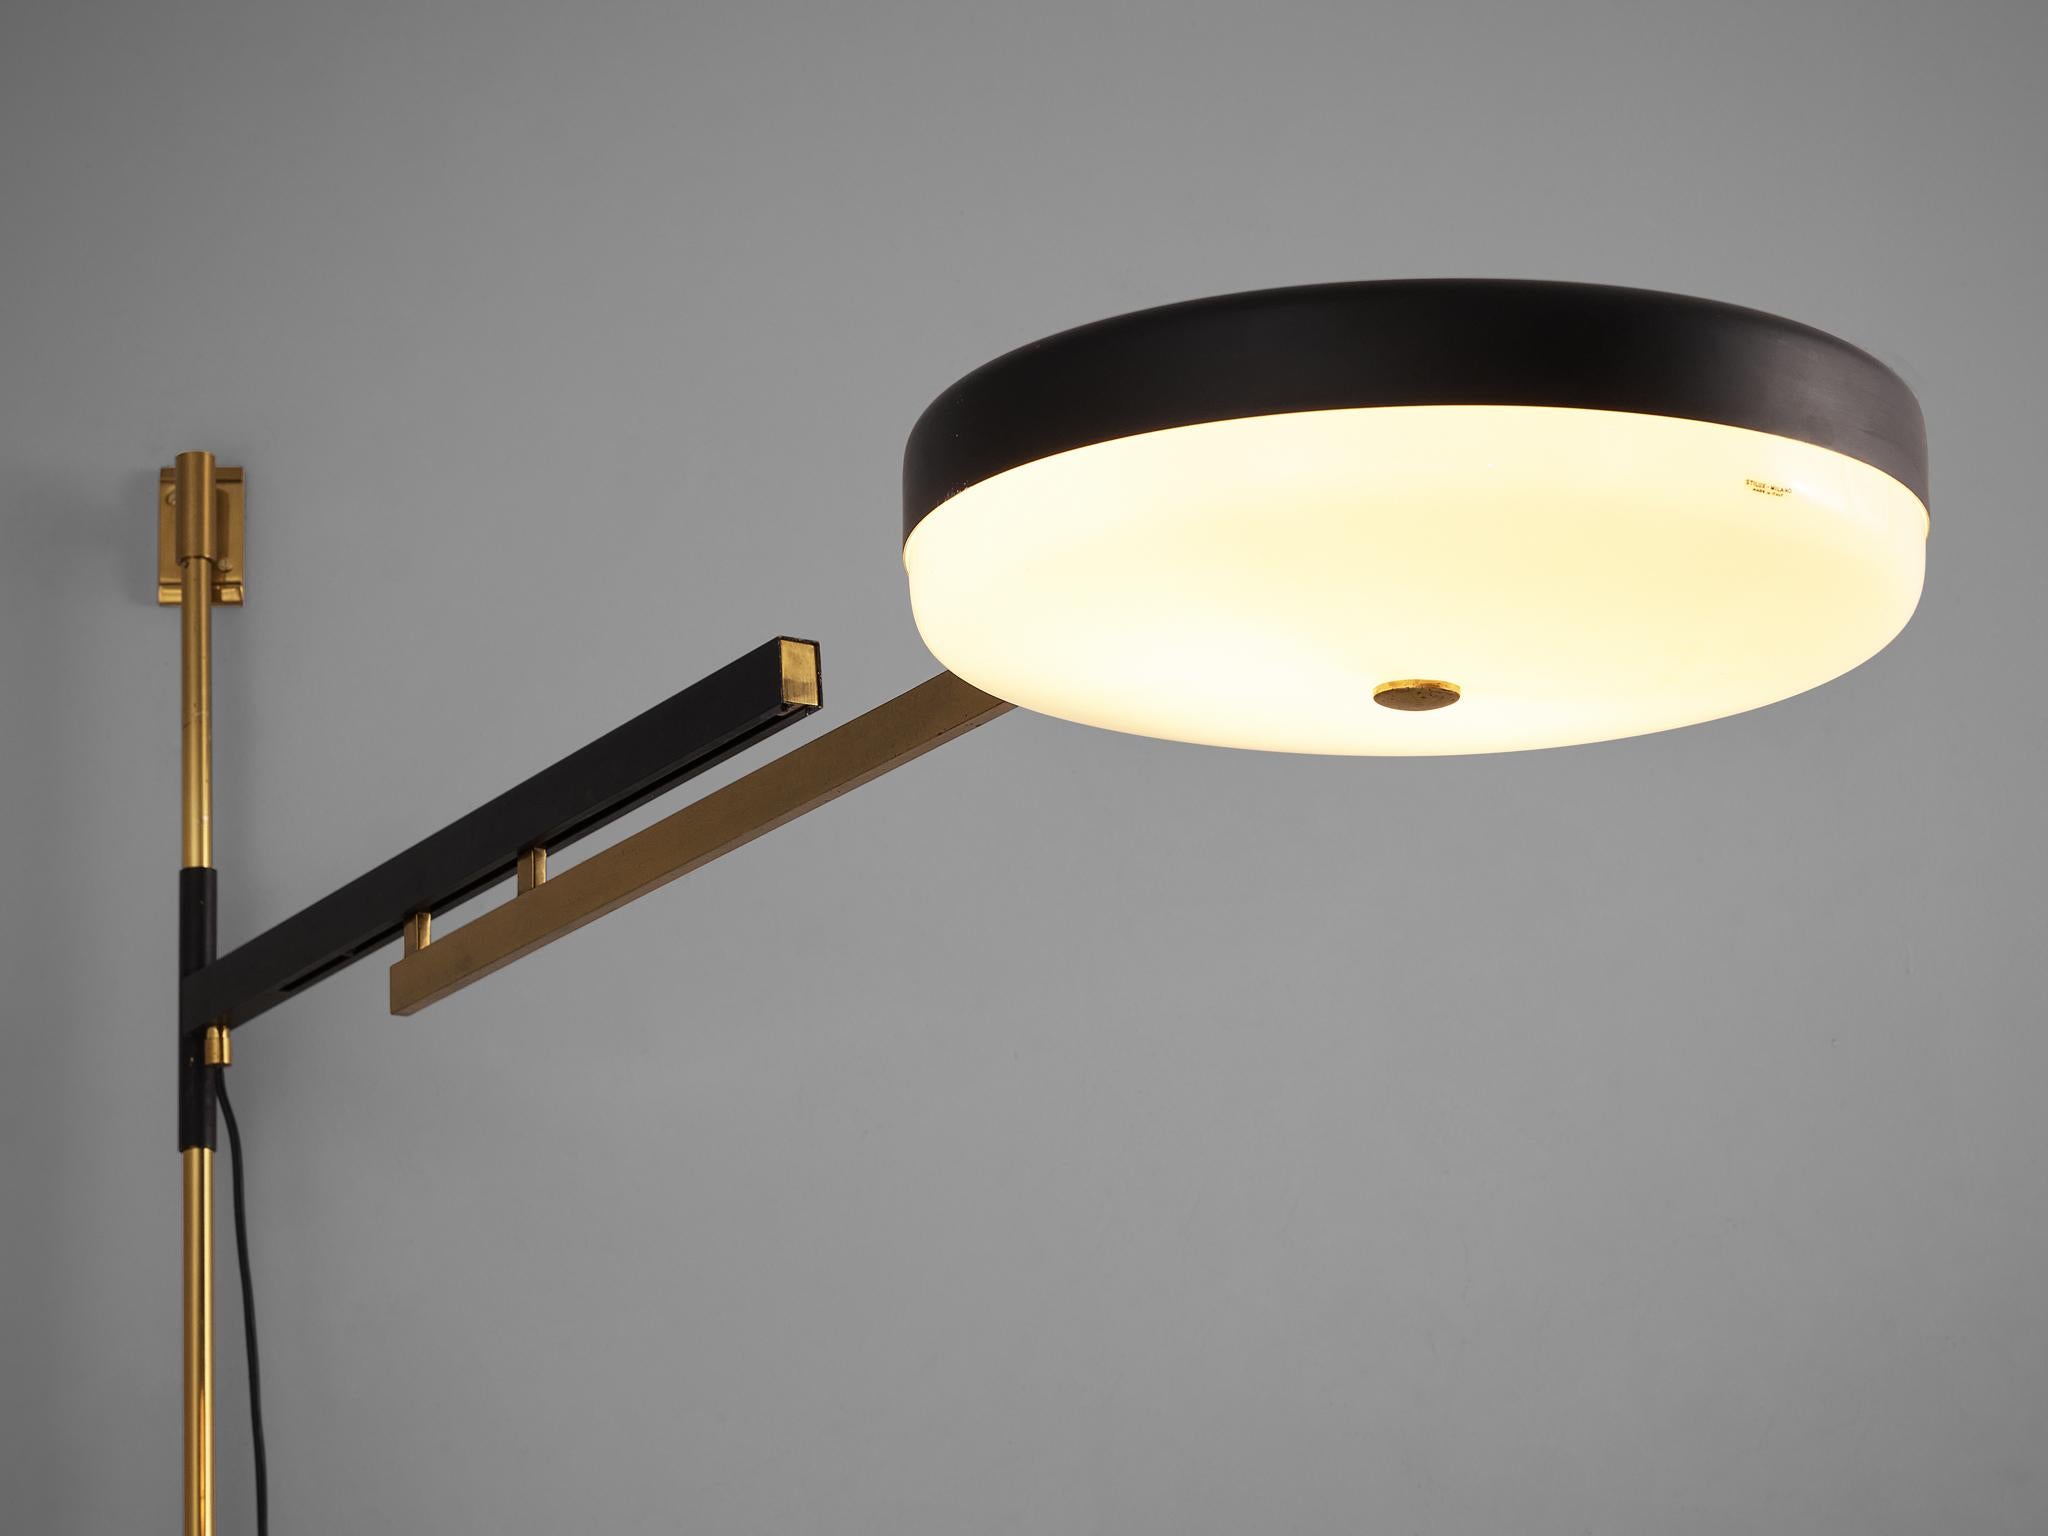 Italian Stilux Wall-Mounted Lamp with Adjustable Arms in Brass and Black Metal